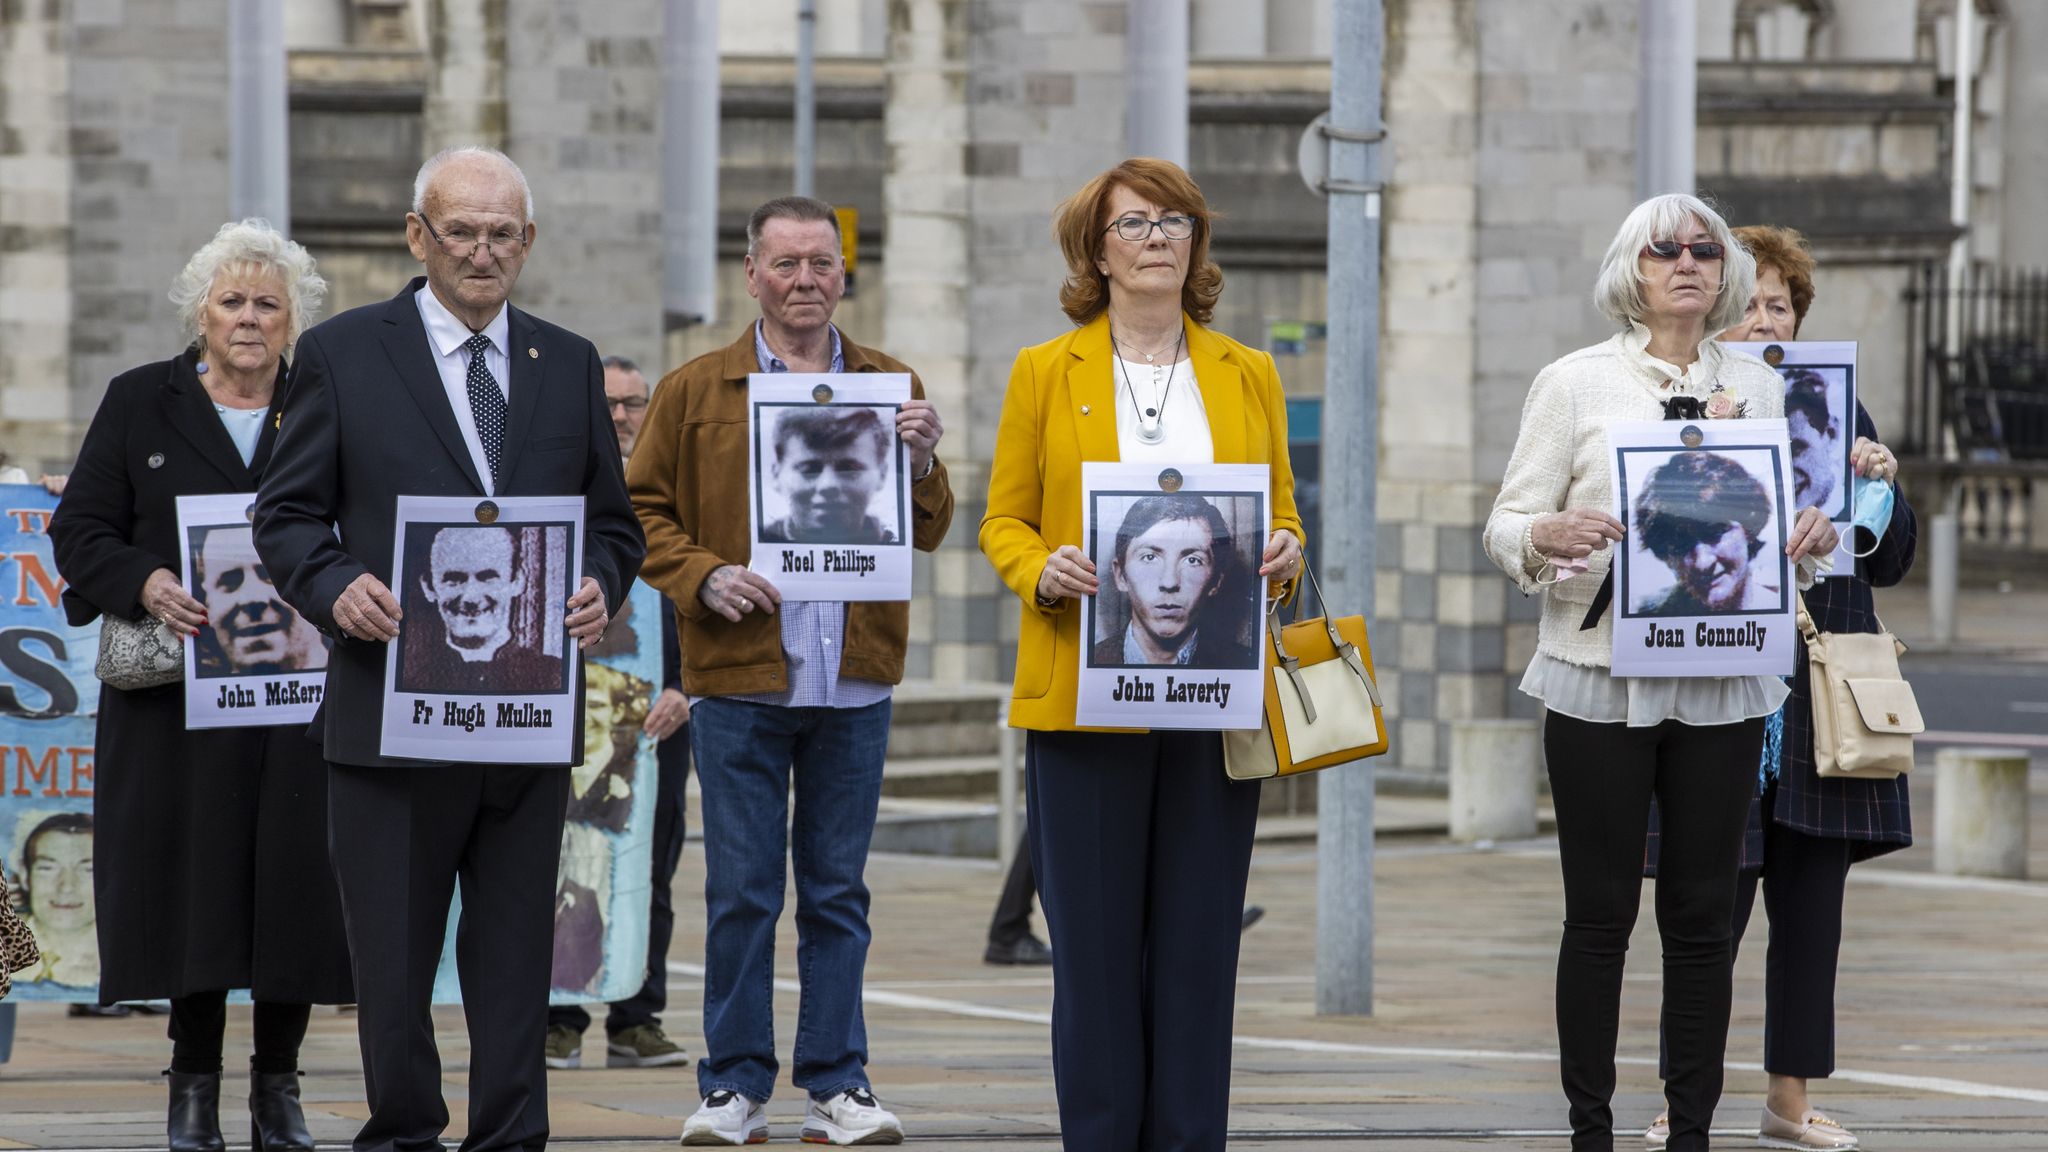 Ballymurphy inquest: 10 innocent people killed without justification, coroner finds | UK News | Sky News